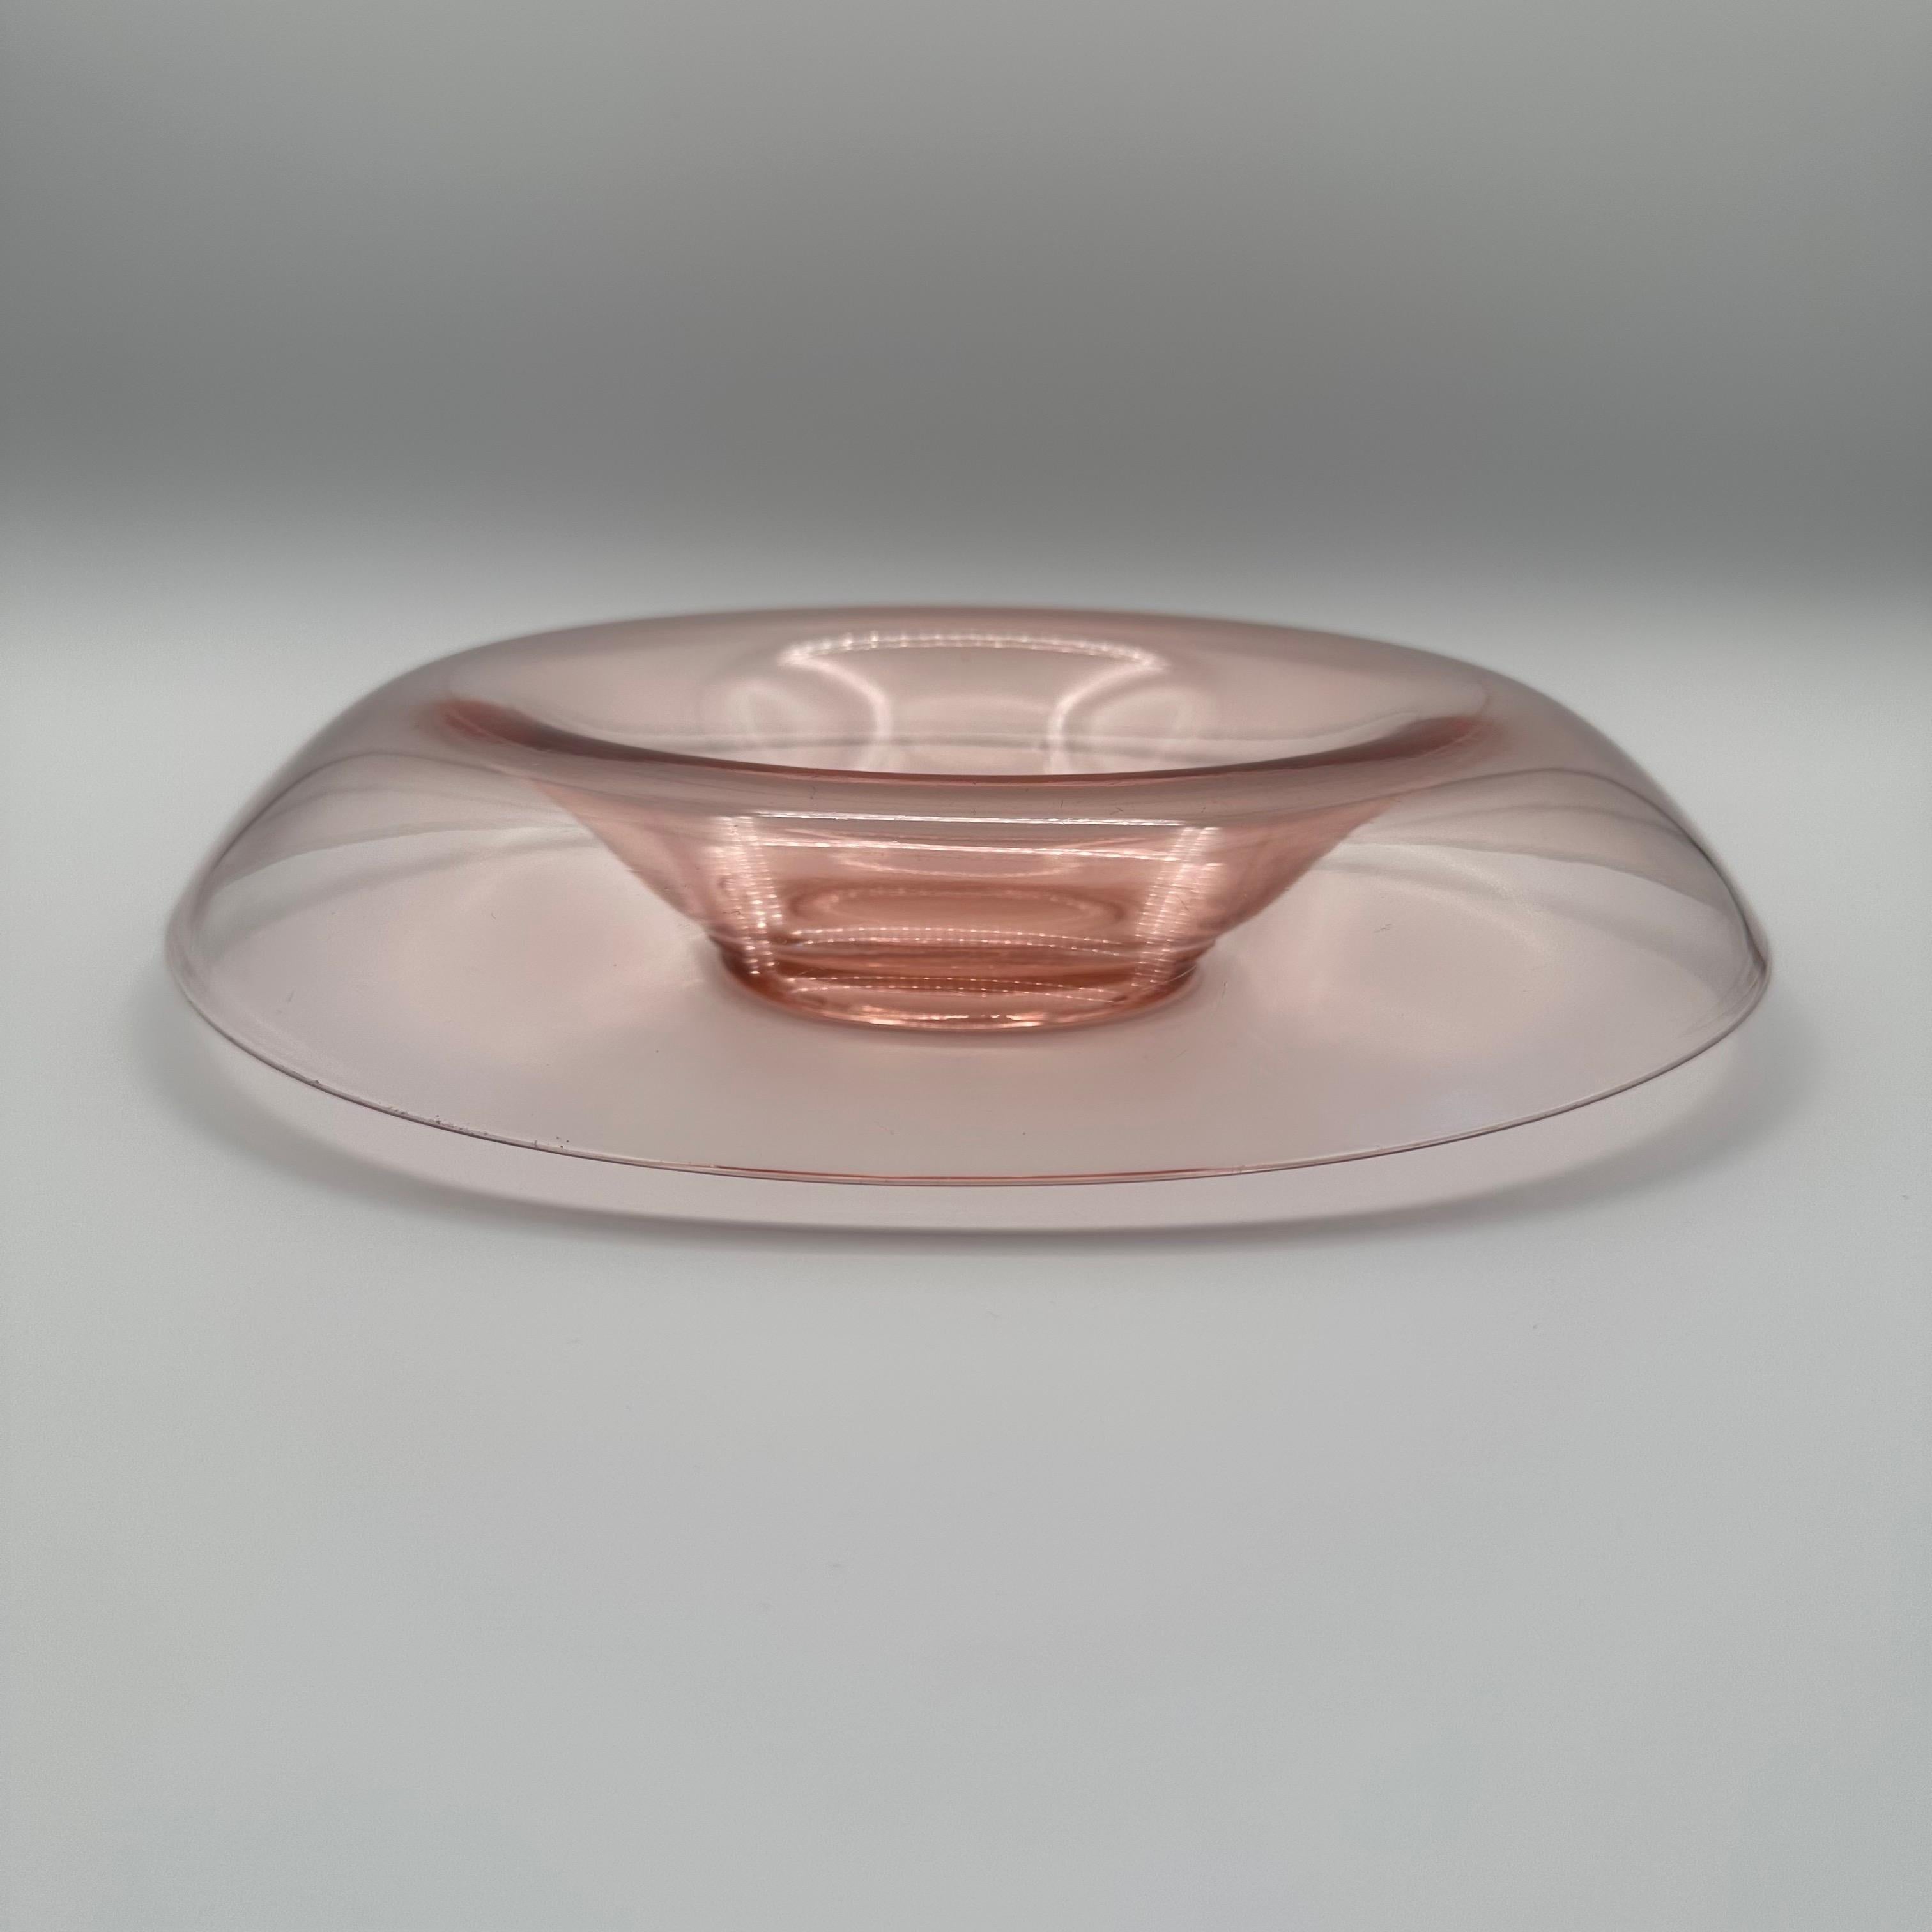 A vintage round centerpiece, bowl or shallow vase in pink molded glass. Amazing and unique curved waterfall console bowl shape, with the edges of the bowl folding nearly all the way over. 

Some fine scratches and a few indentations to the edge